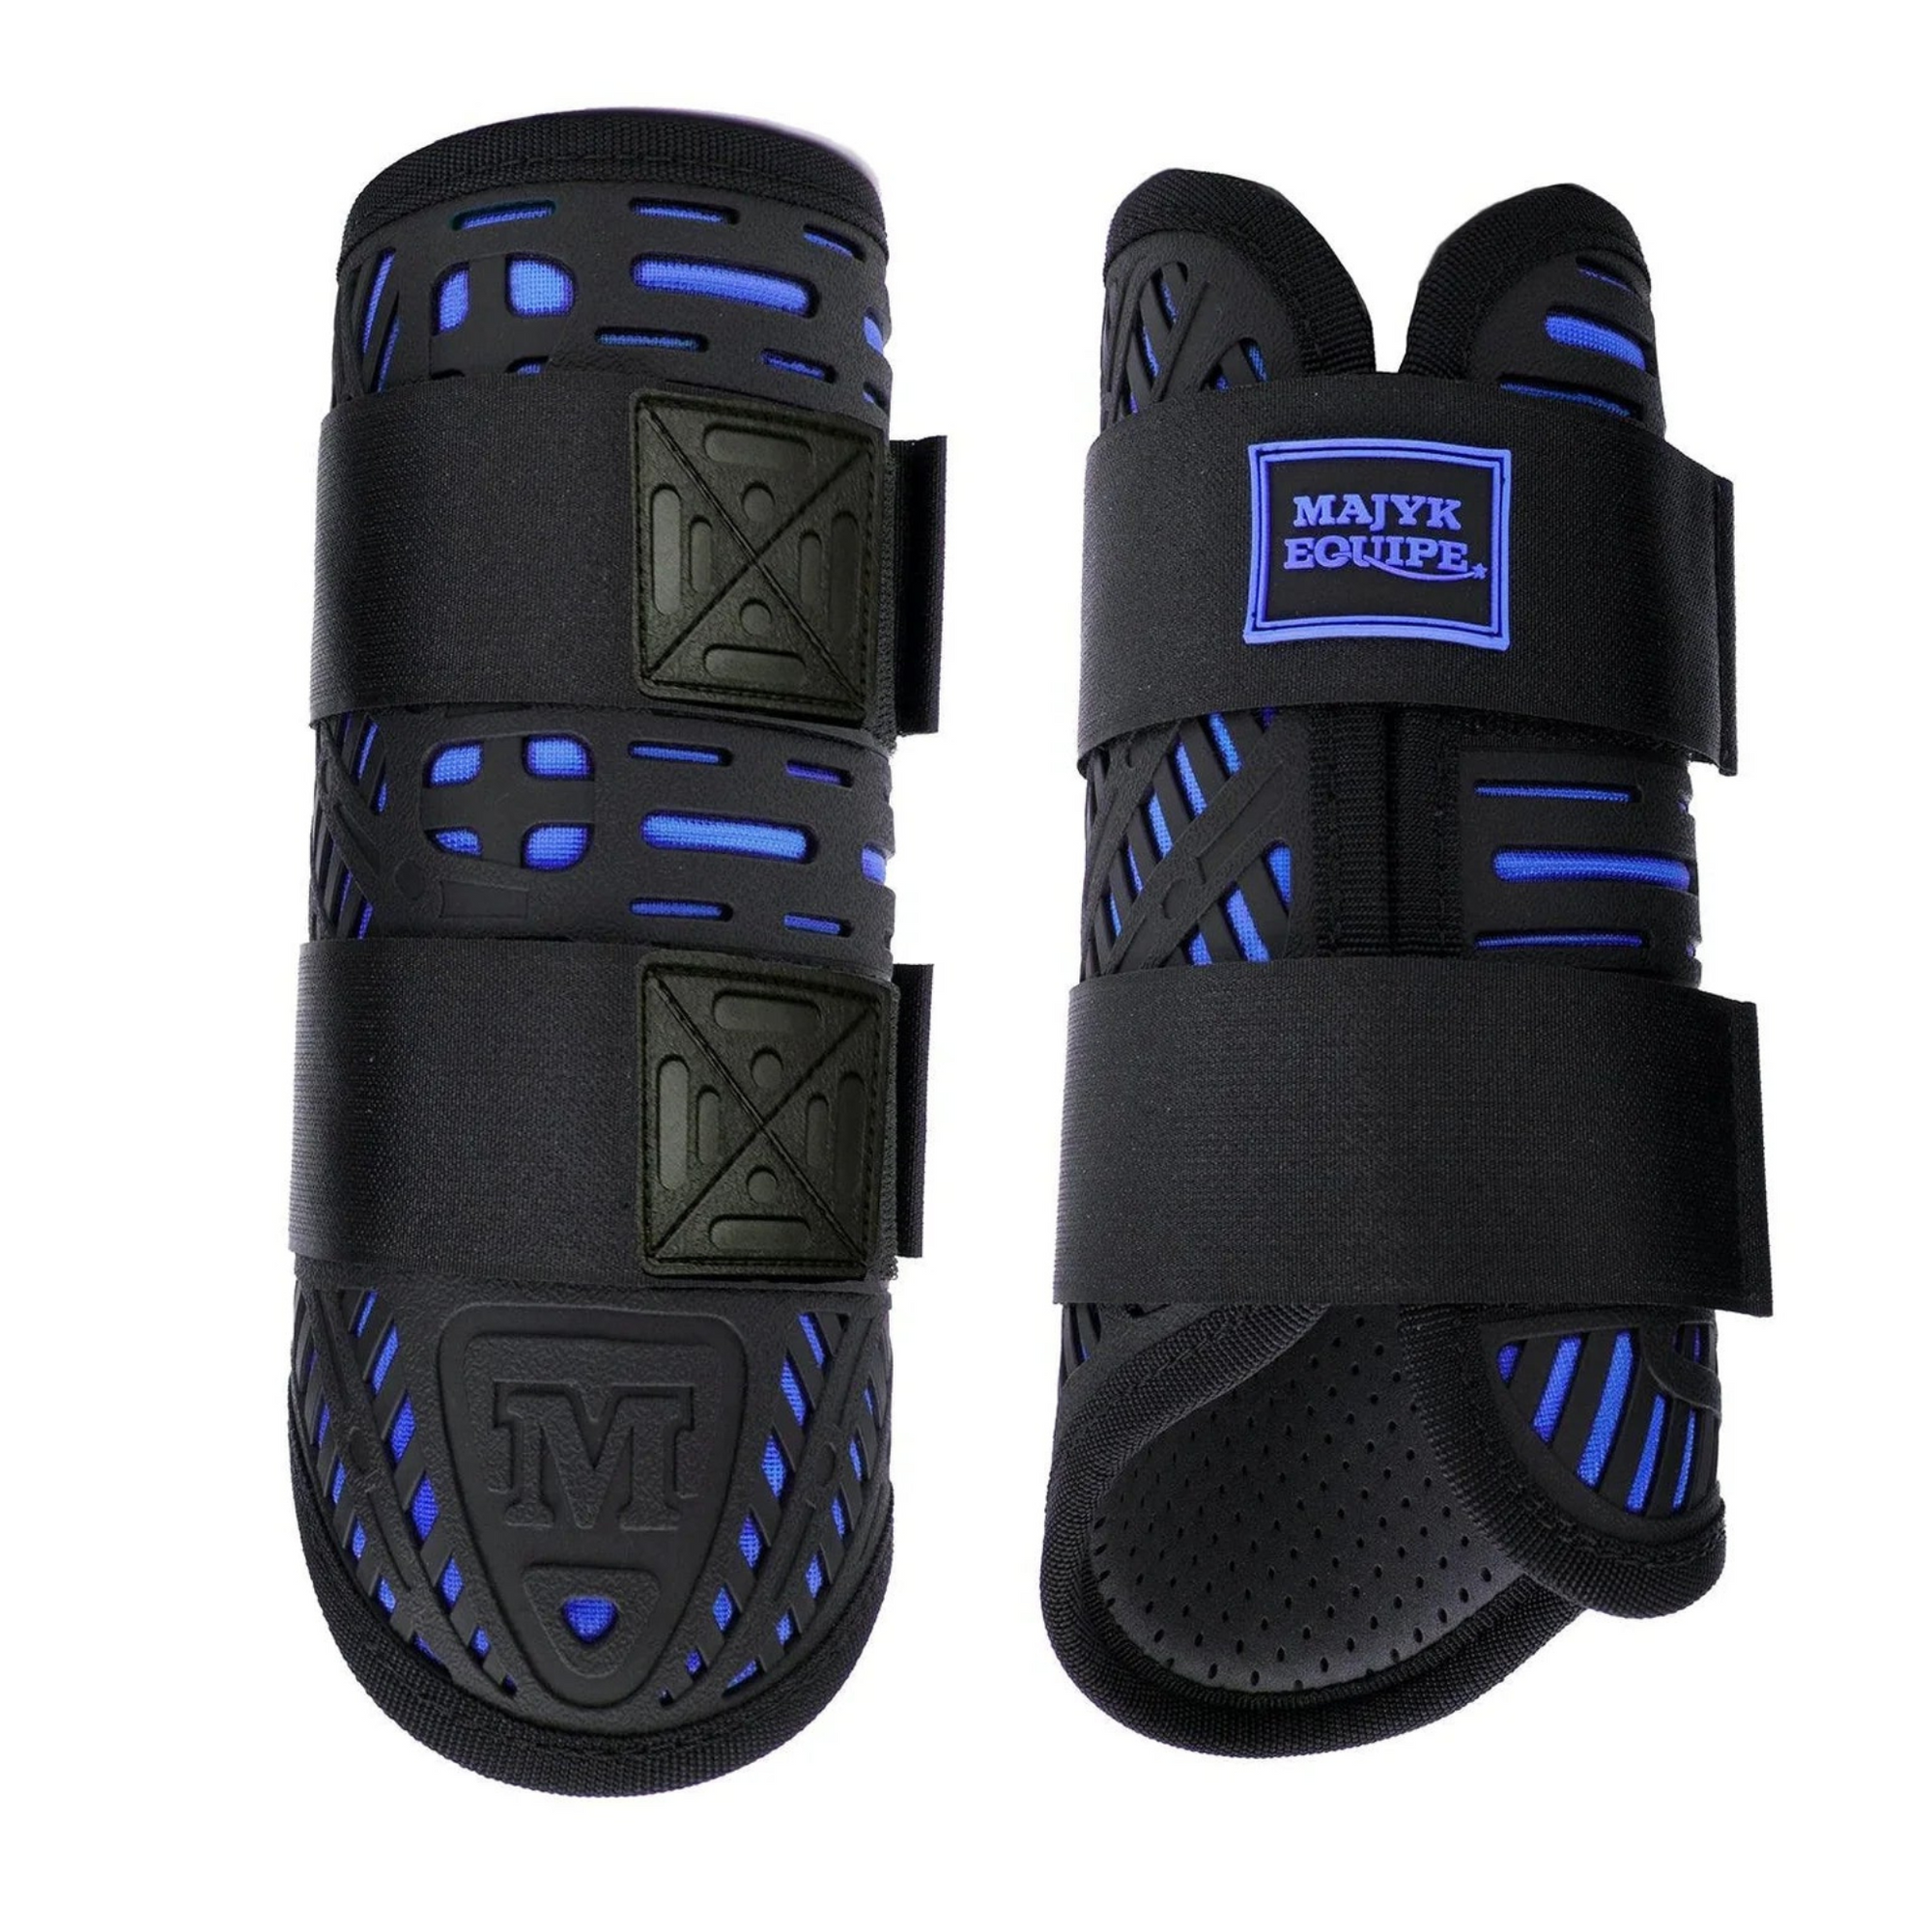 Bright blue and black eventing boots